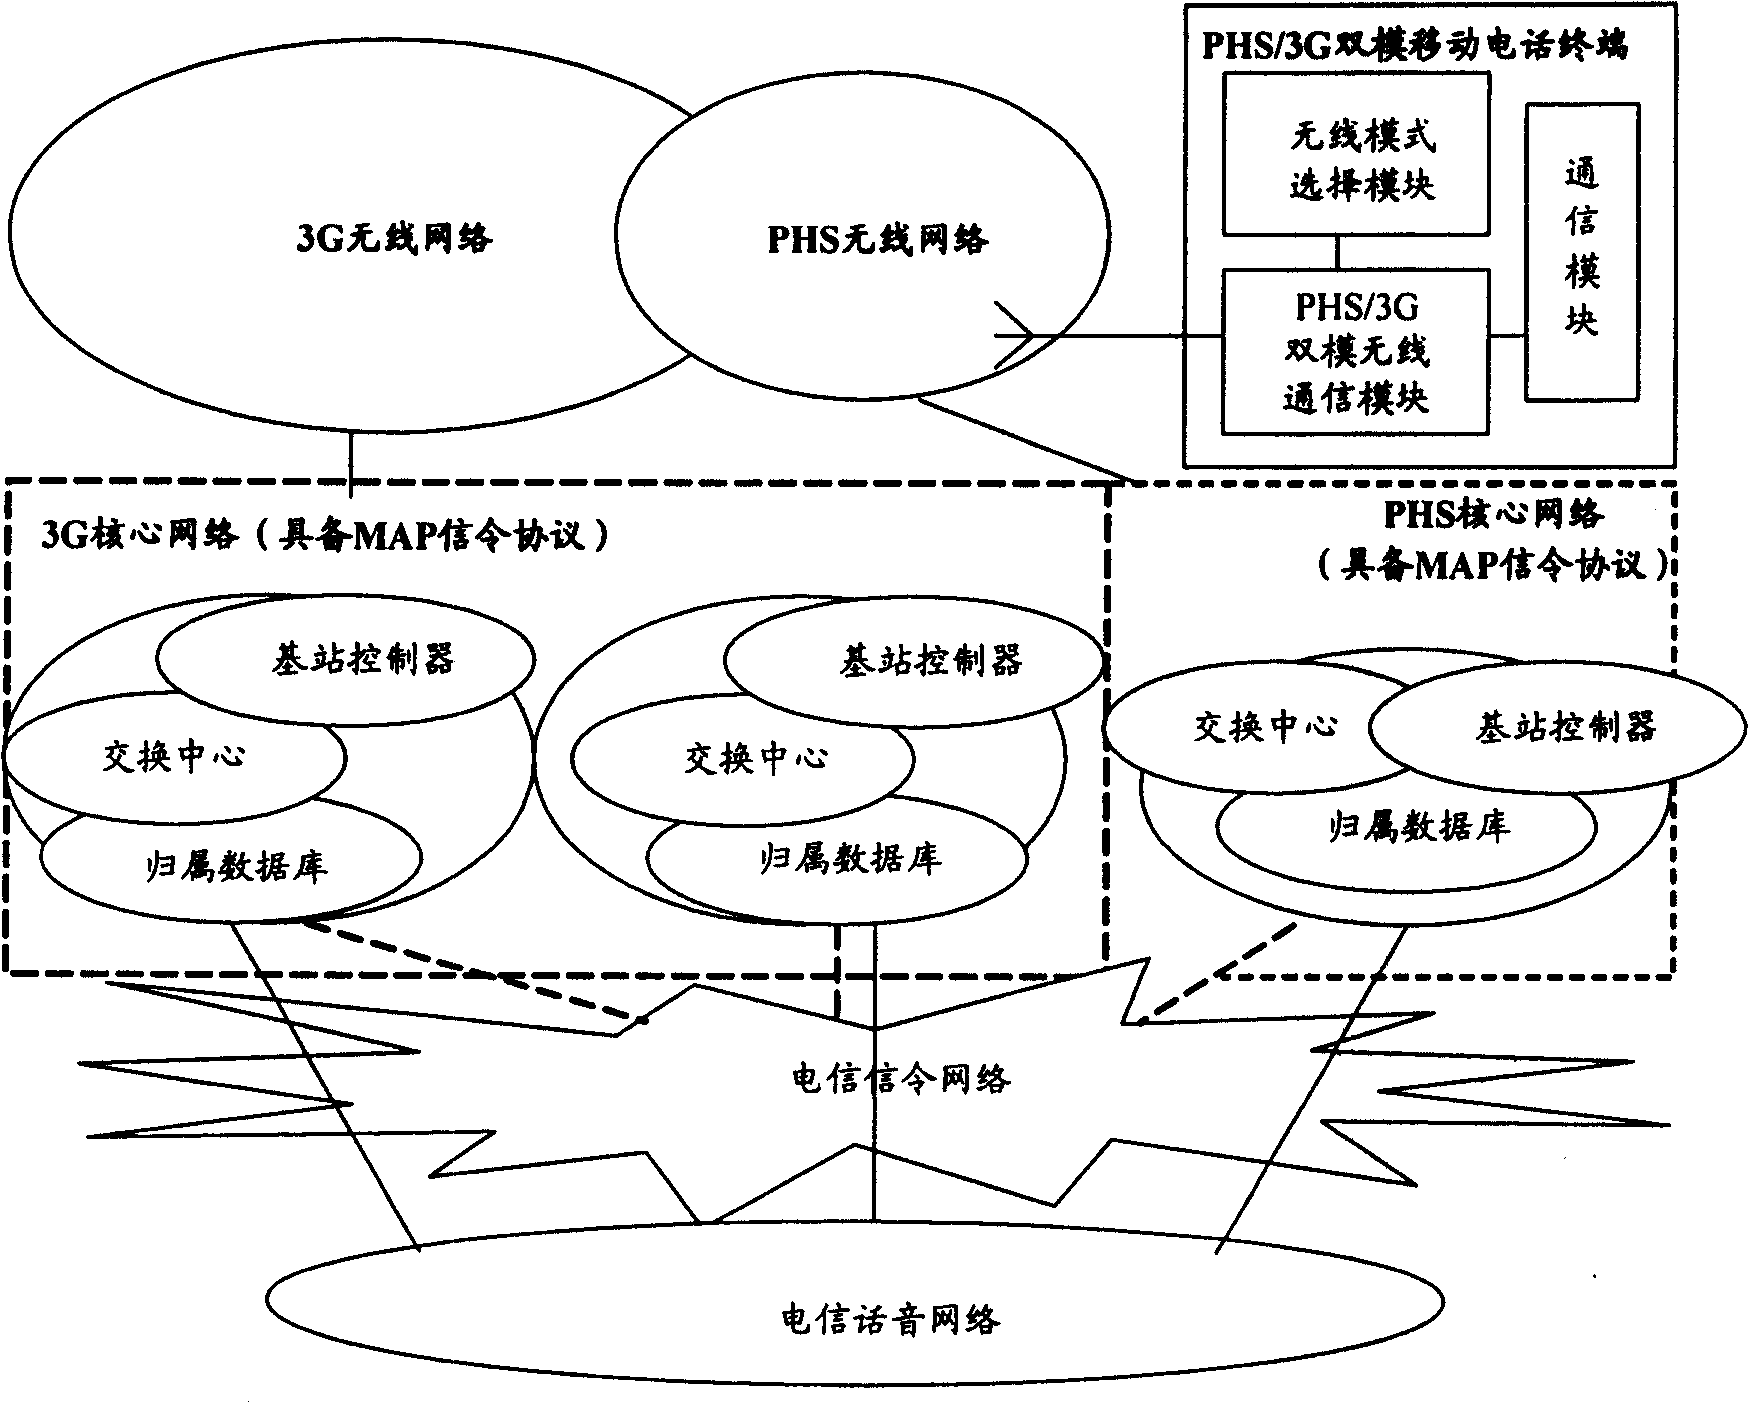 Working method of Xiaolingtong network used as terminal of subnet of 3rd generation mobile network